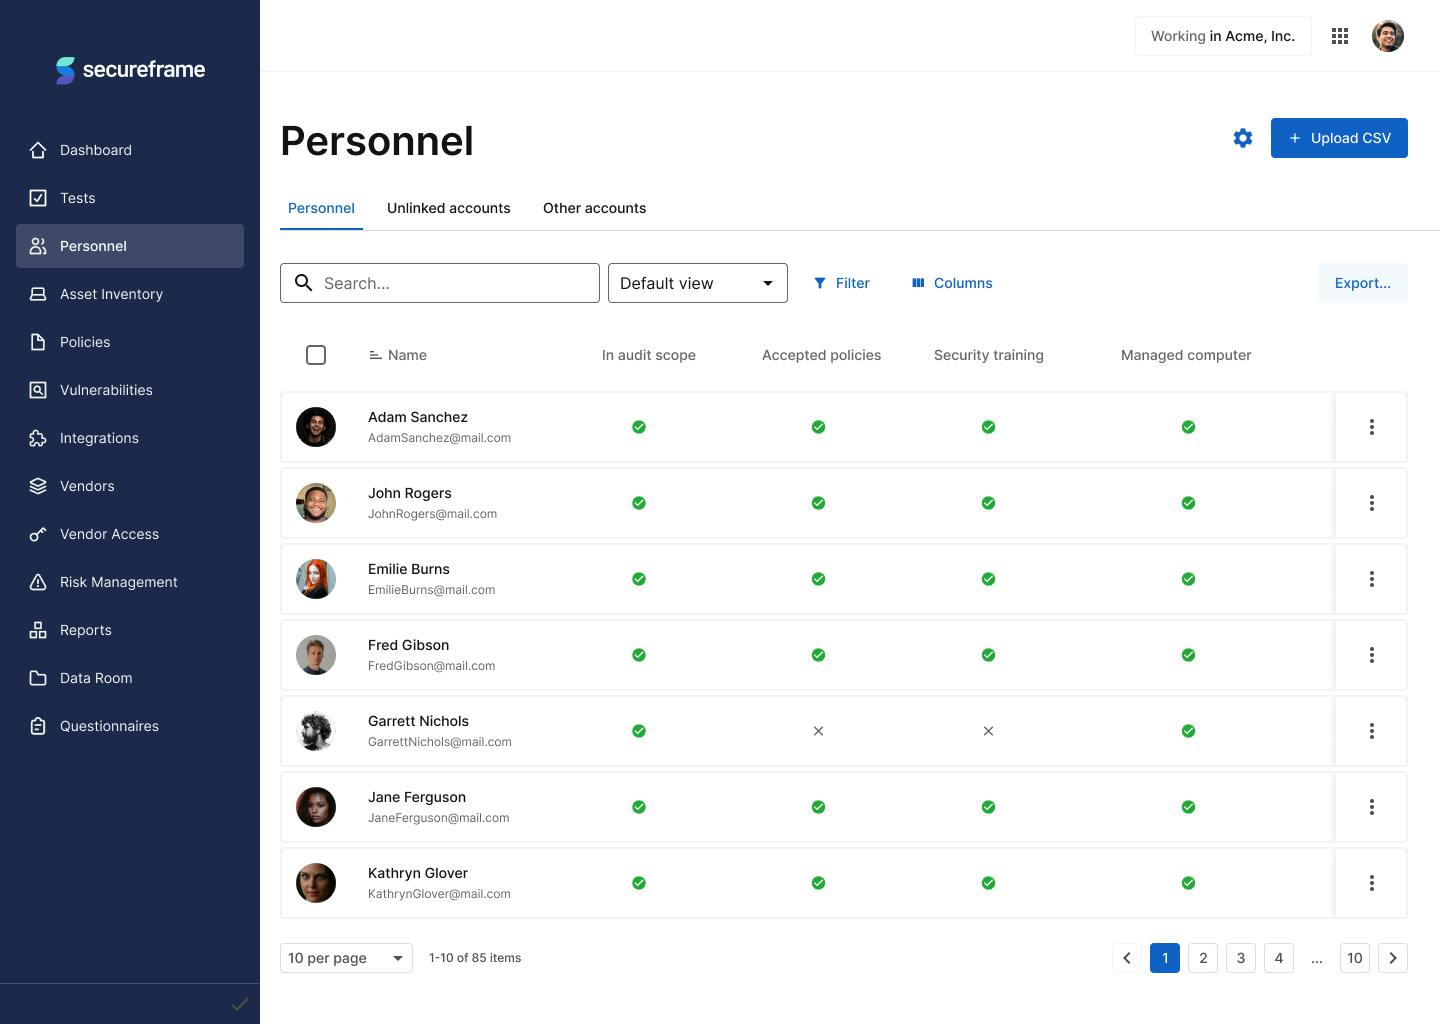 User viewing personnel and whether they've completed onboarding tasks in the Secureframe app